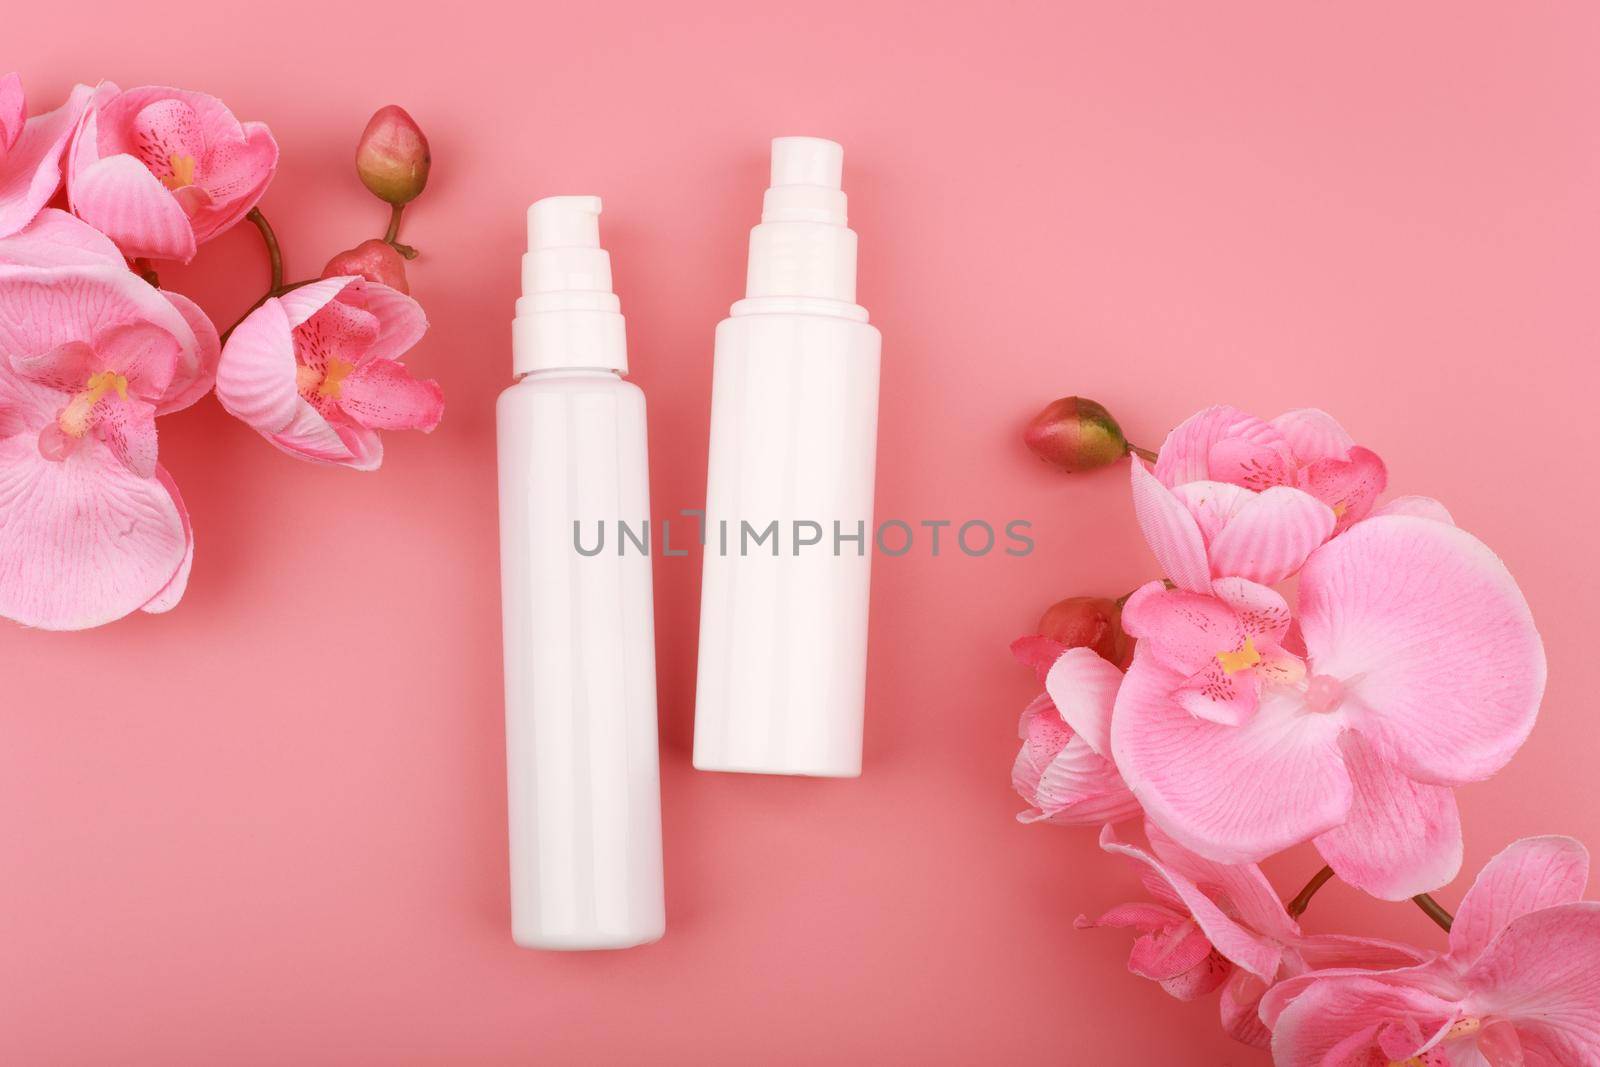 Flat lay with two creams on pink background with flowers. Concept of skin care and beauty or daily skin routine